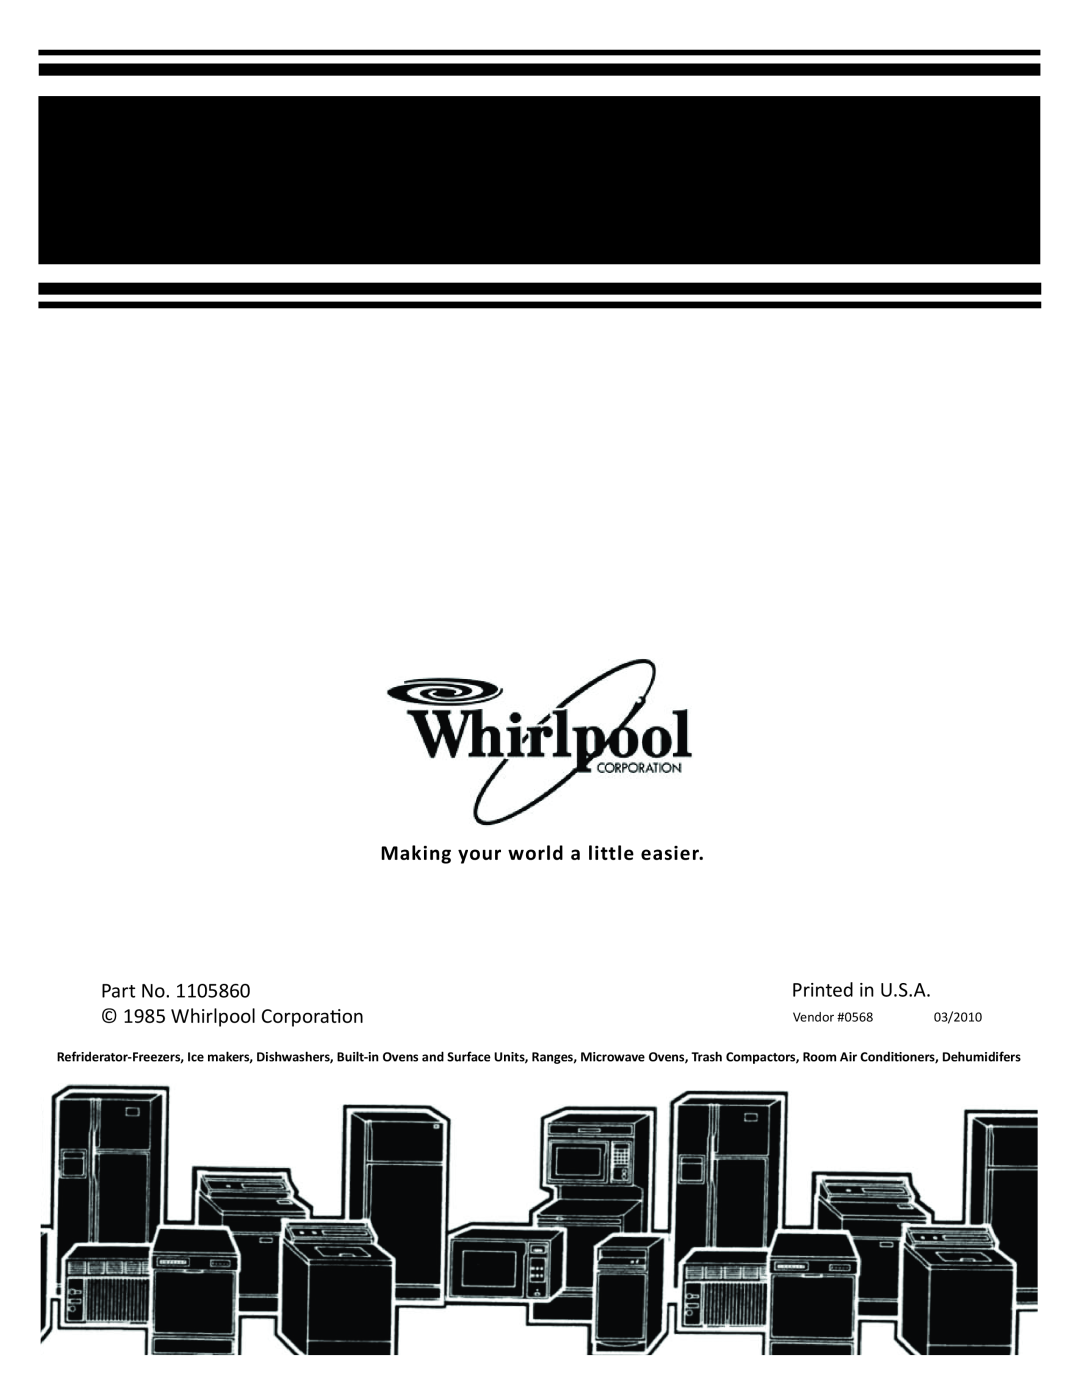 Whirlpool ET16AK manual Making your world a lit tle easier, Whirlpool Corporao n, Vendor #0568, 03/2010 